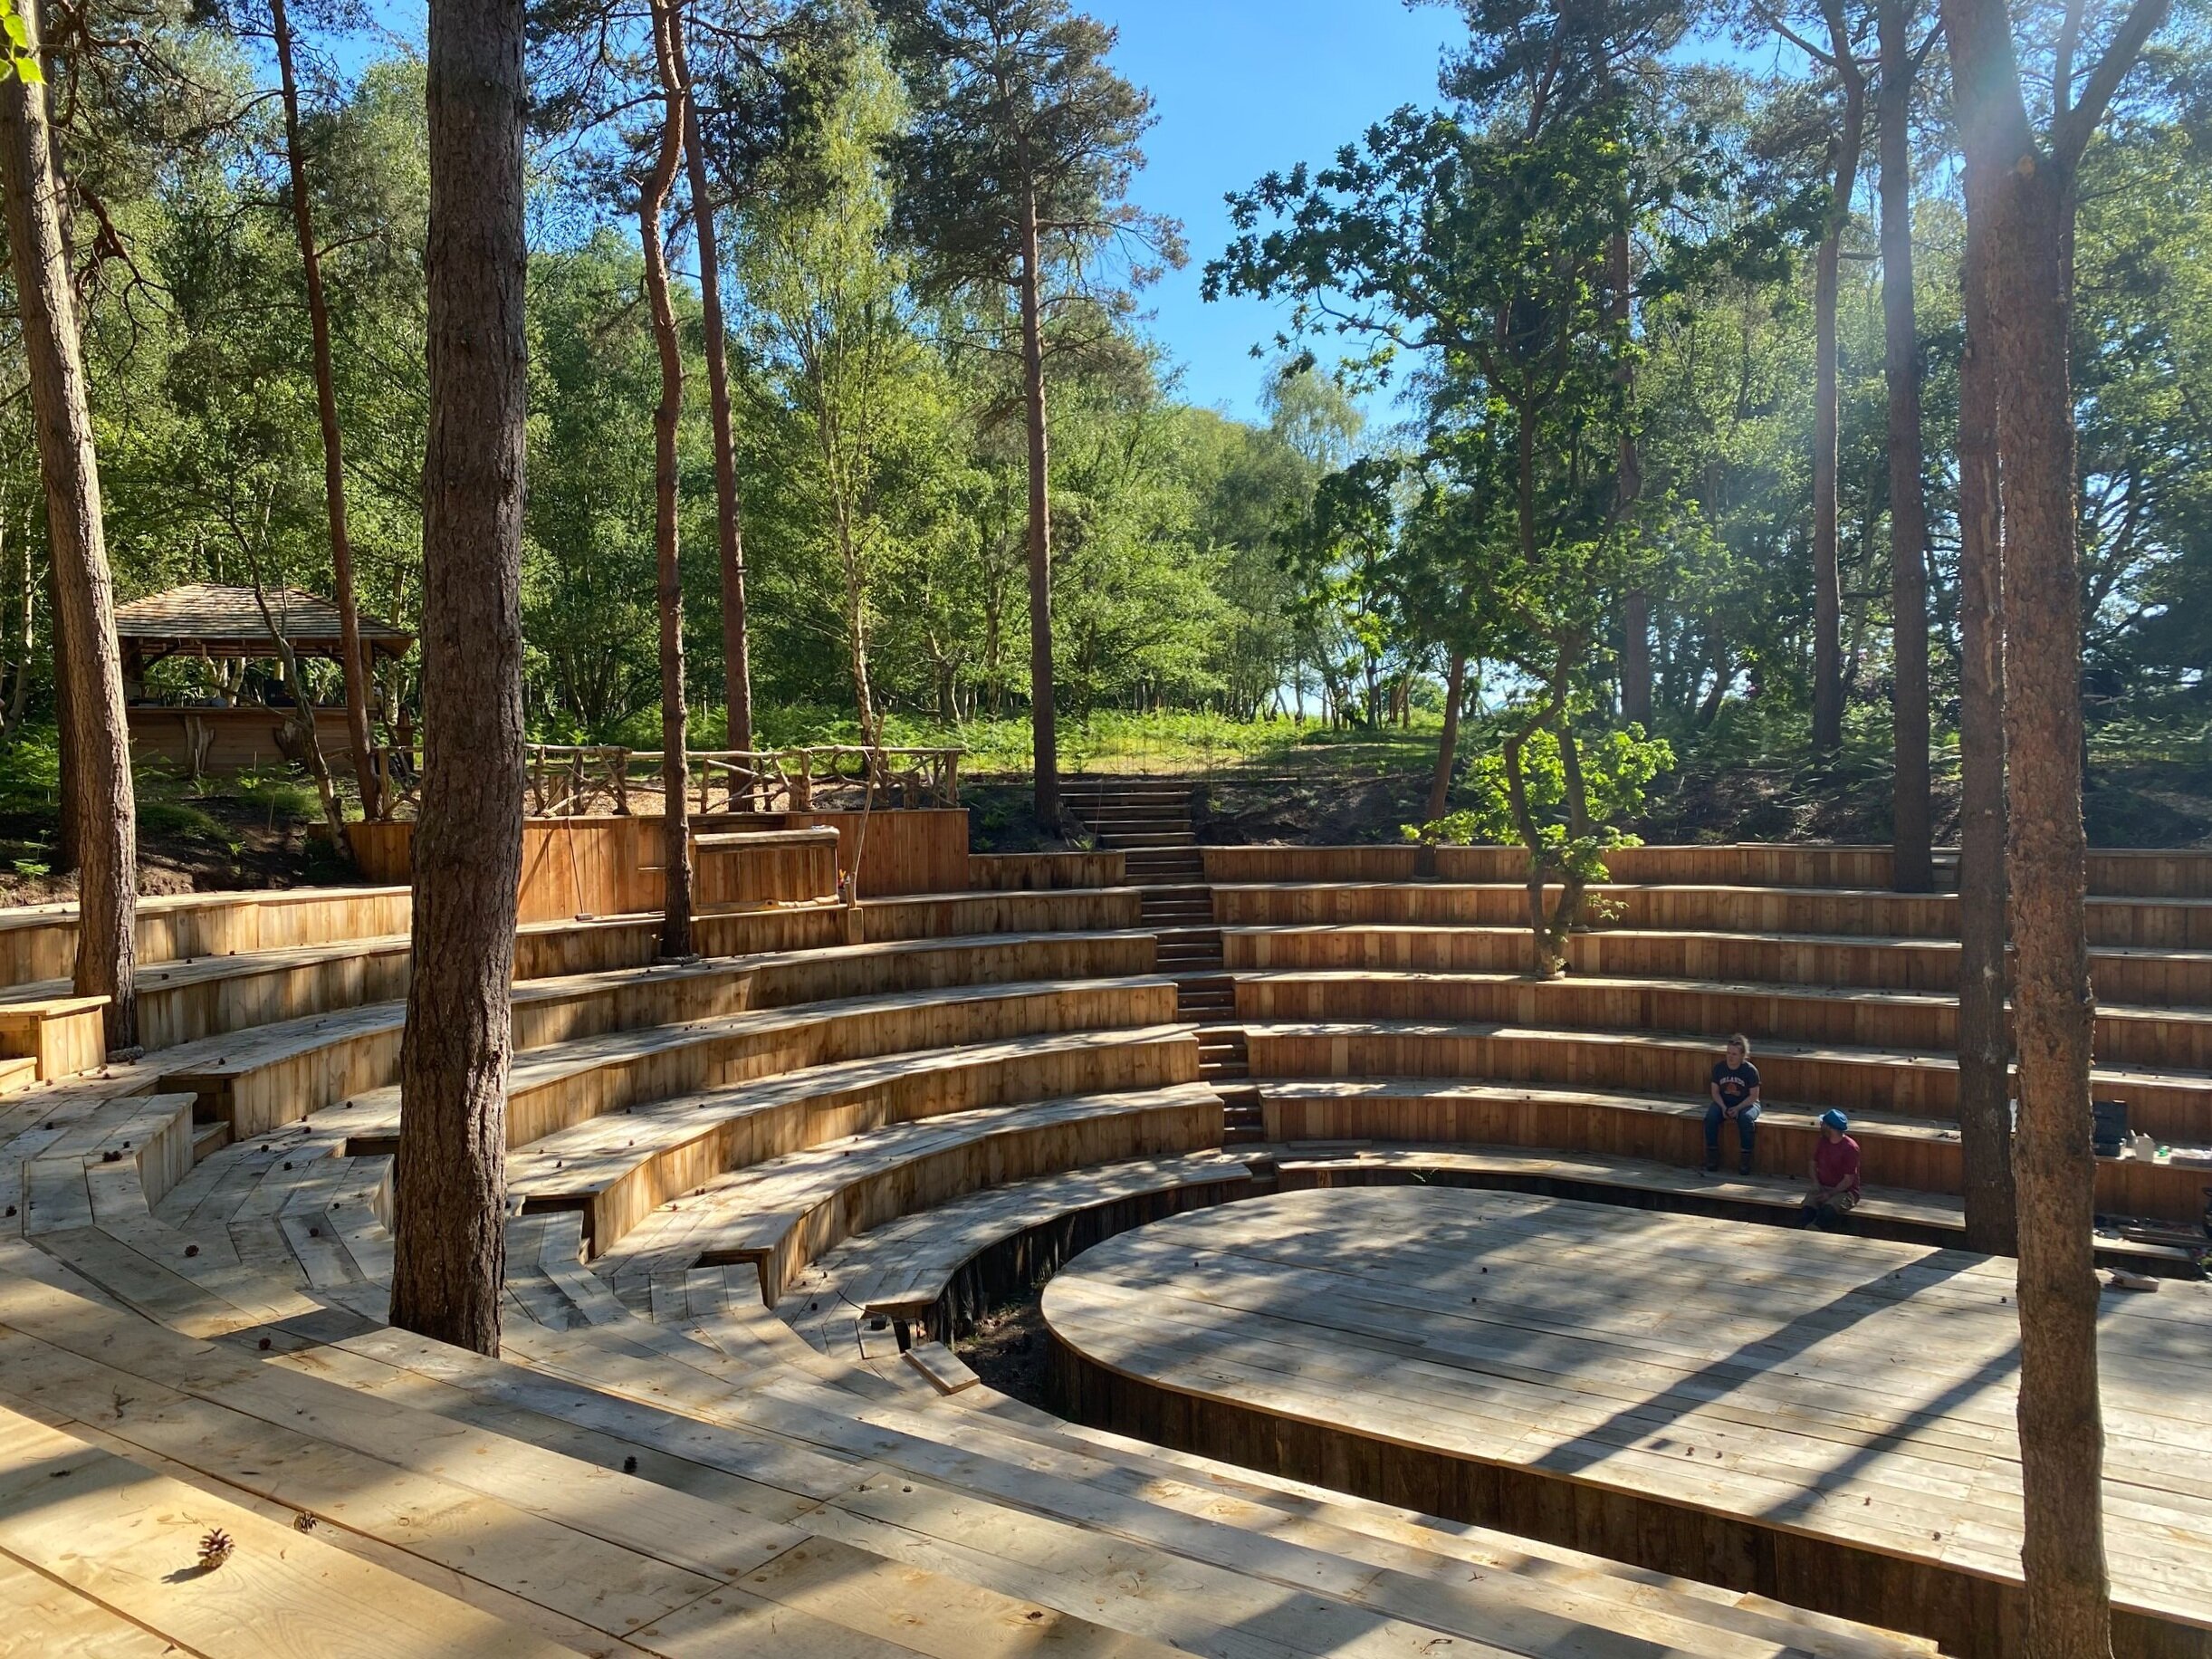 Thorington theatre: A sustainable approach to events&nbsp;